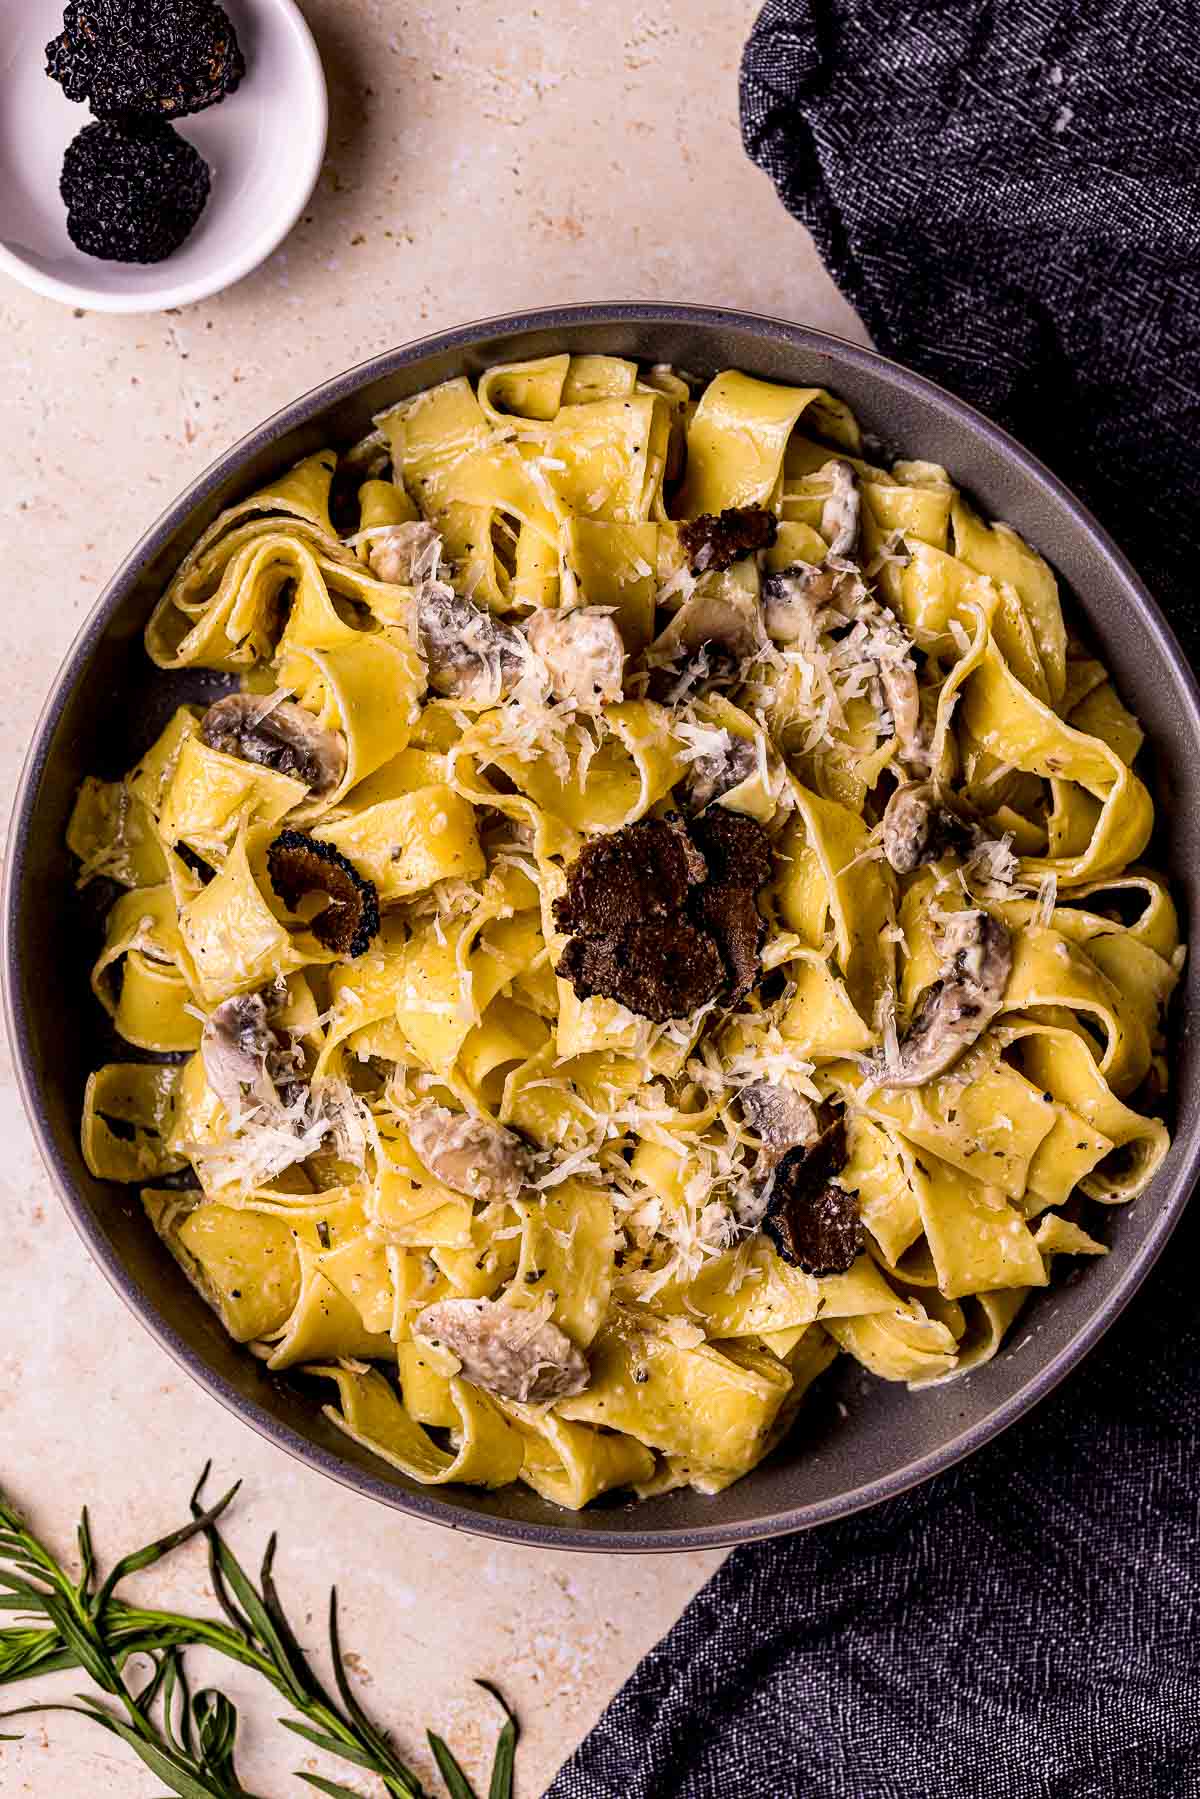 a dish of creamy pasta with black truffles shaved on tp